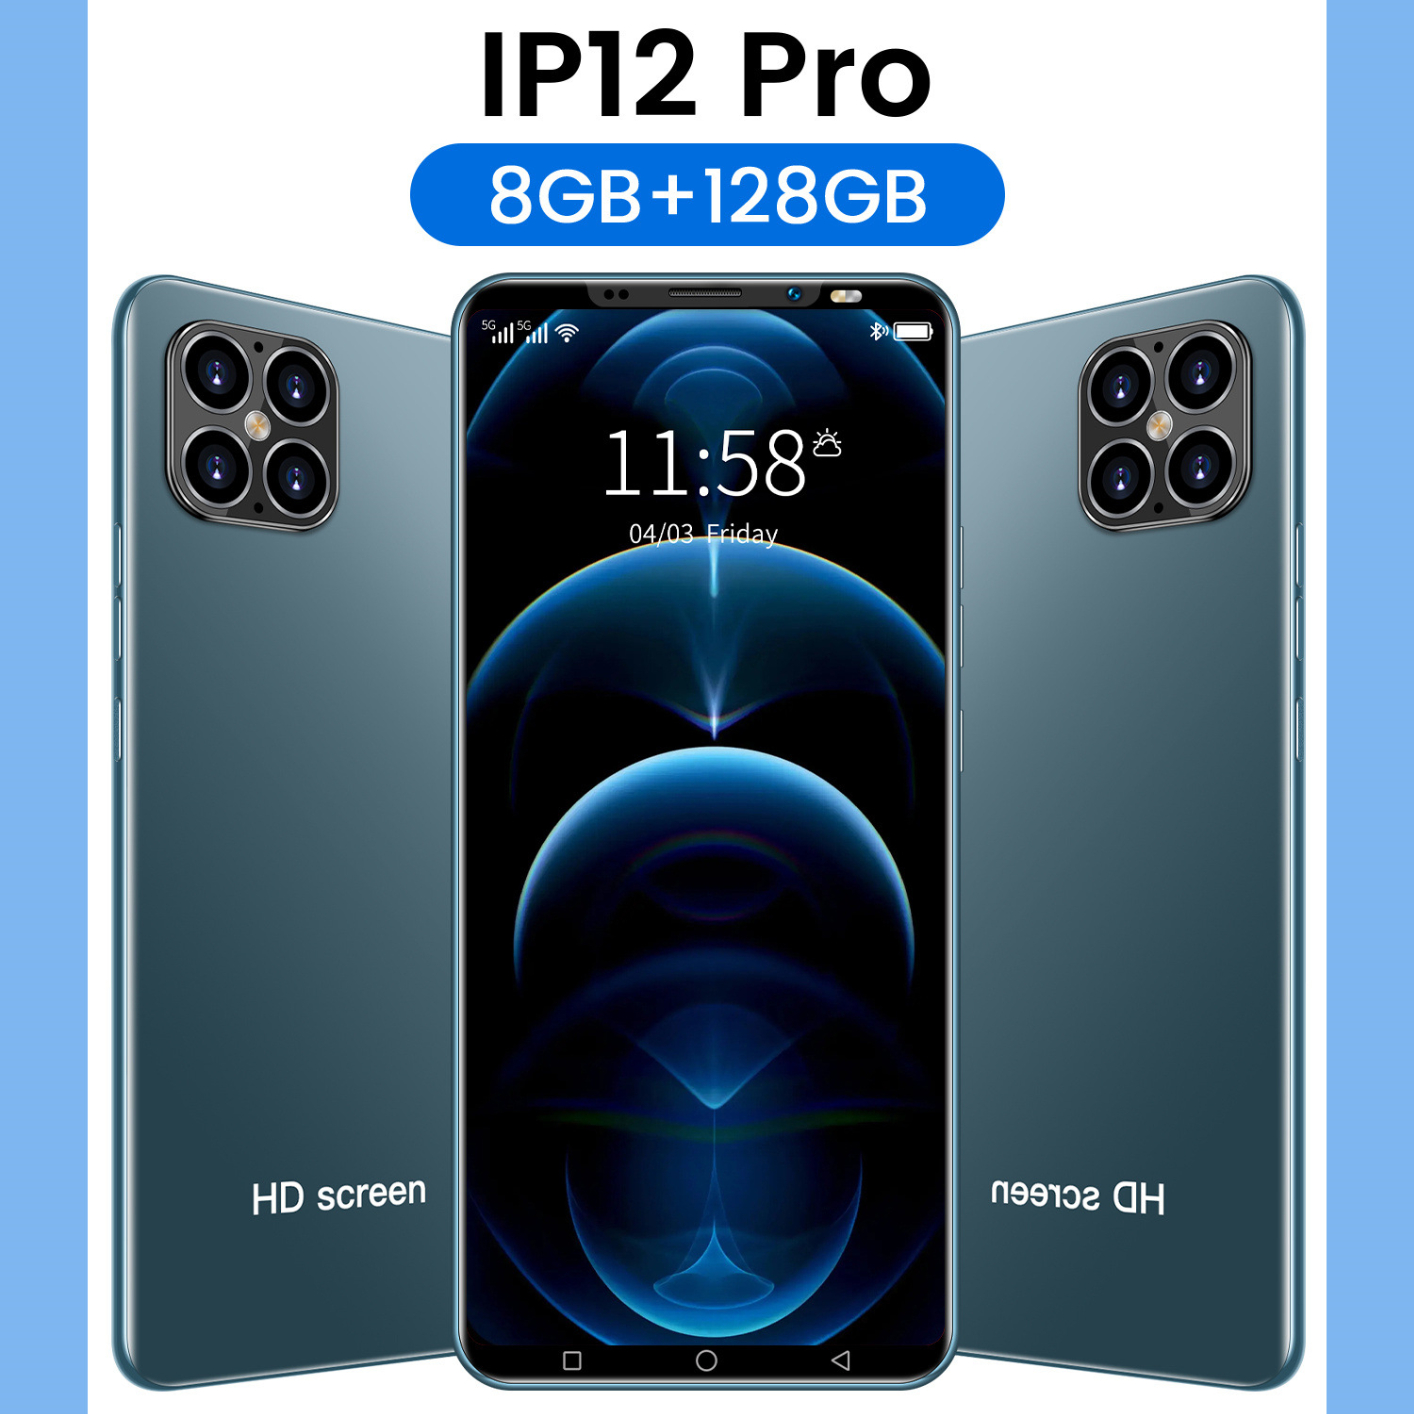 Global Edition Smartphone IP12 Pro 5.1inch 8+128GB Android 10 Core Dual SIM+Micro SD Face Fingerprint ID Unlock 5G Mobile Phone